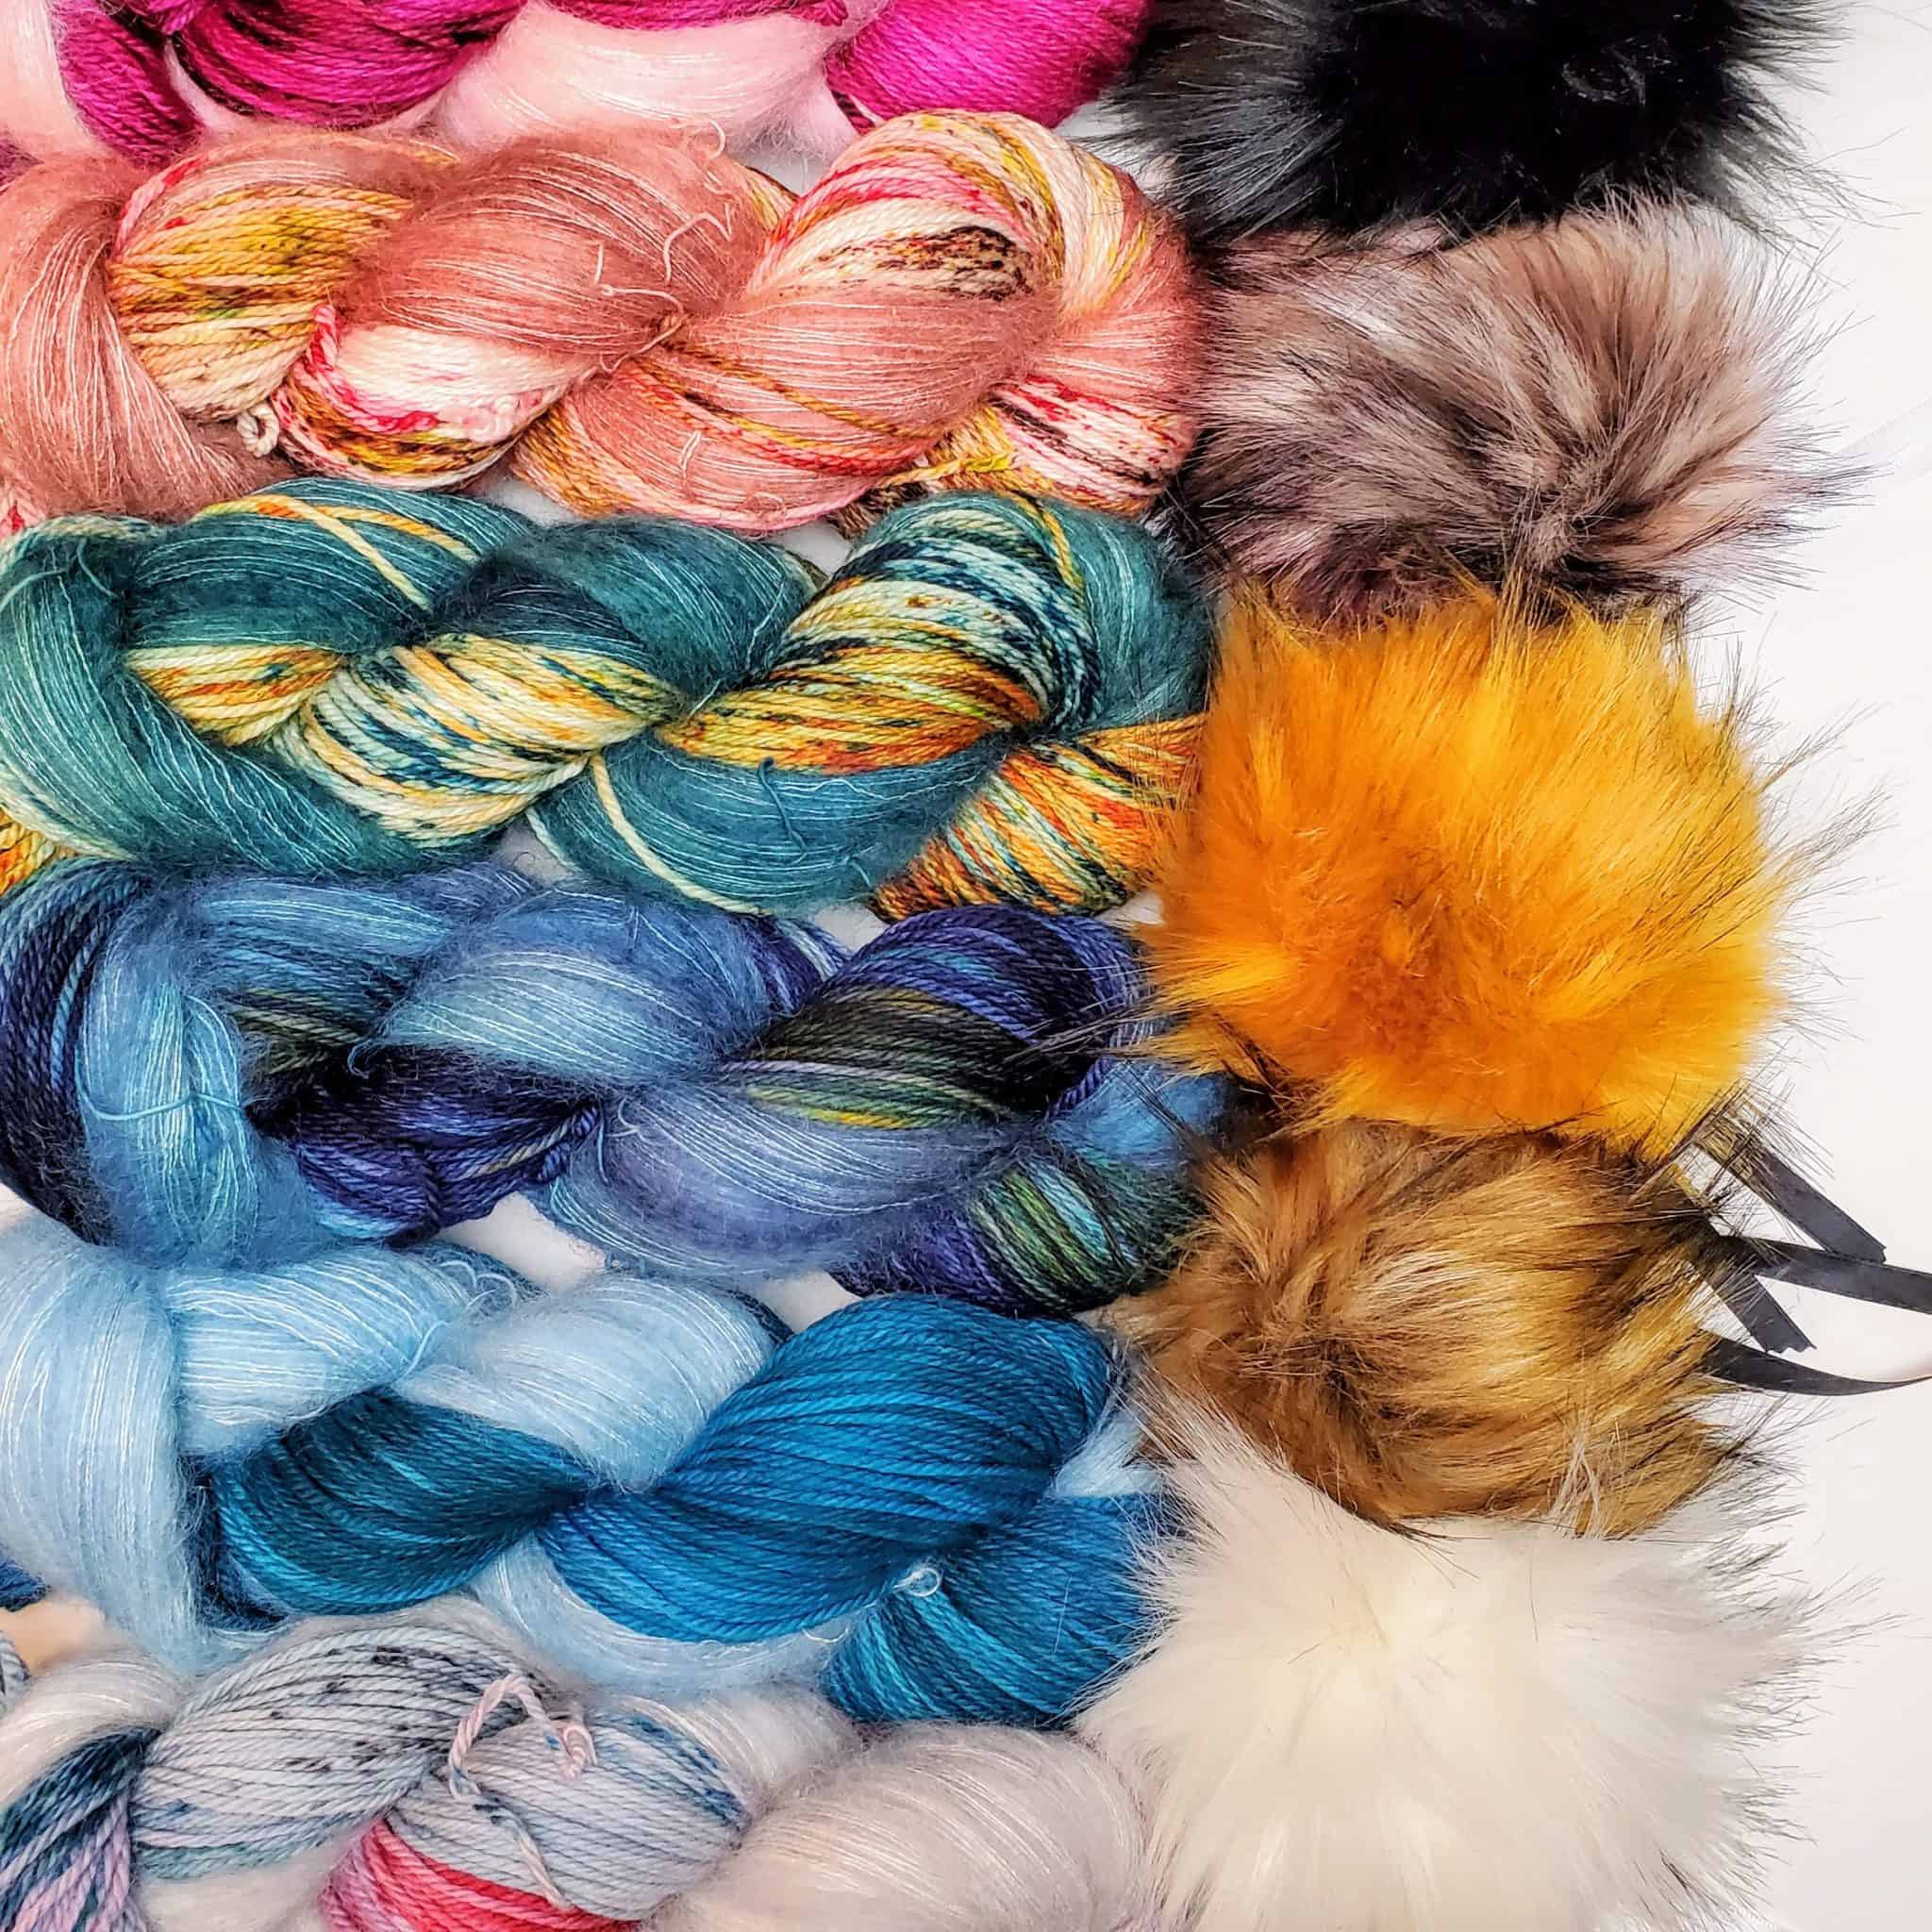 Multicolored skeins of yarn and faux fur pom-poms.